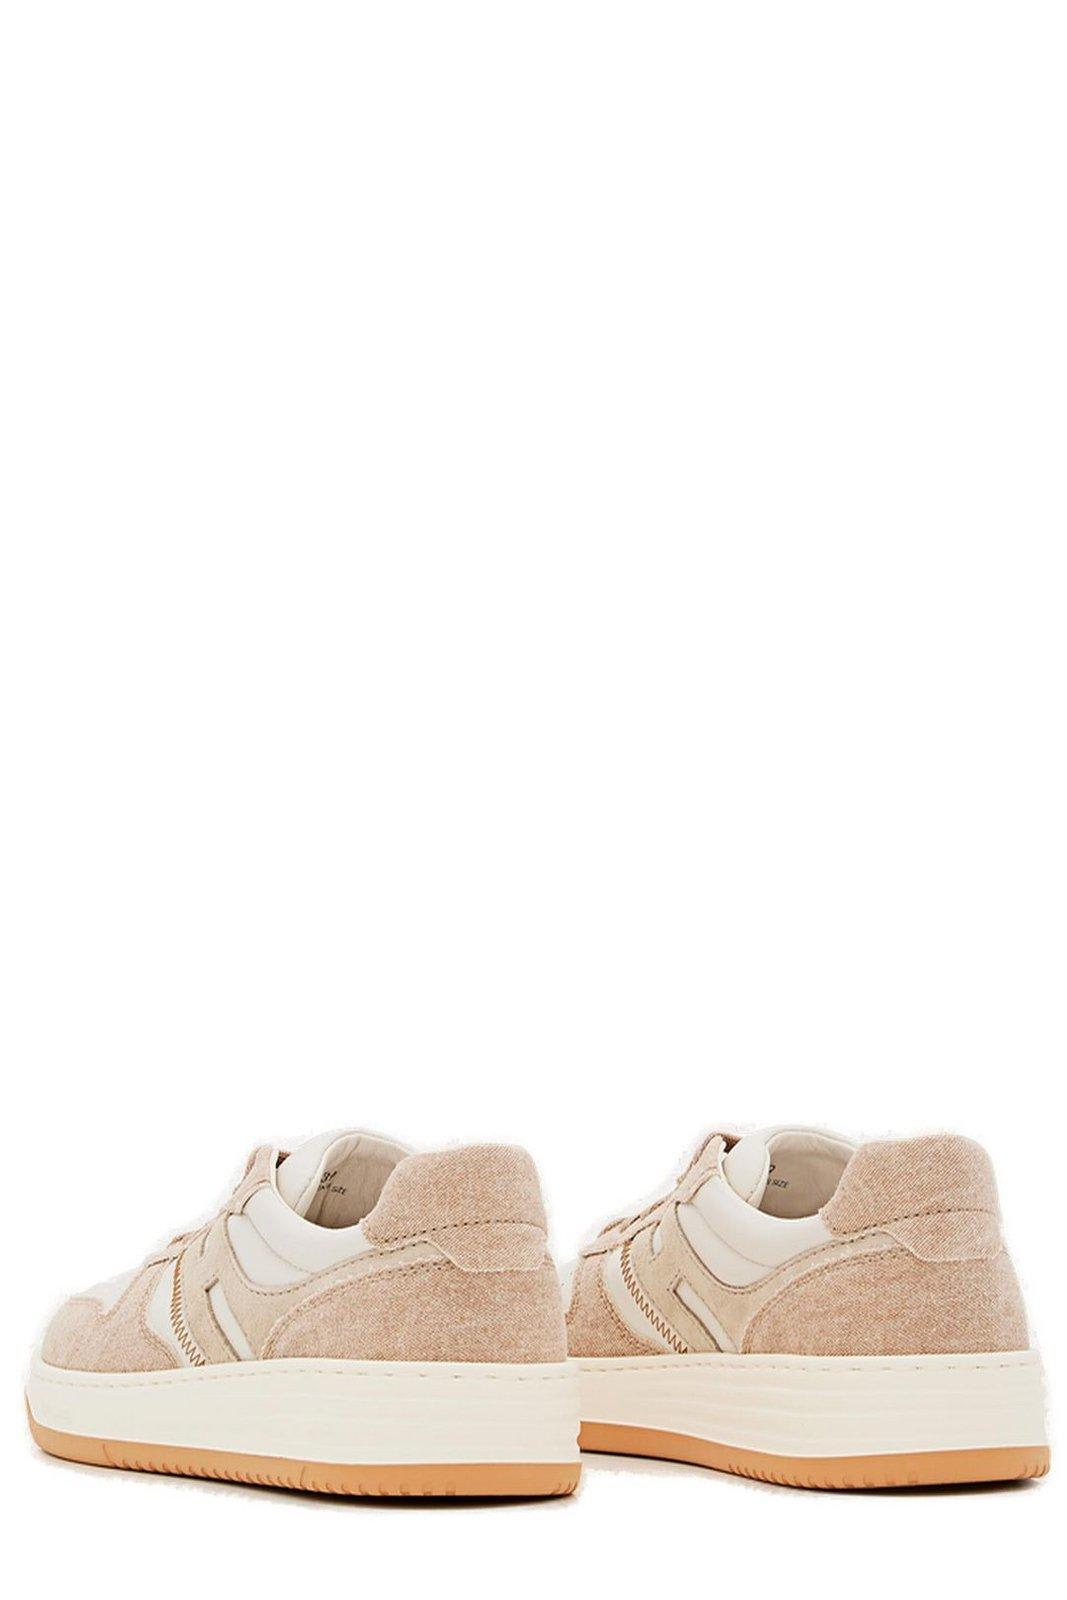 Shop Hogan H630 Lace-up Sneakers In Beige